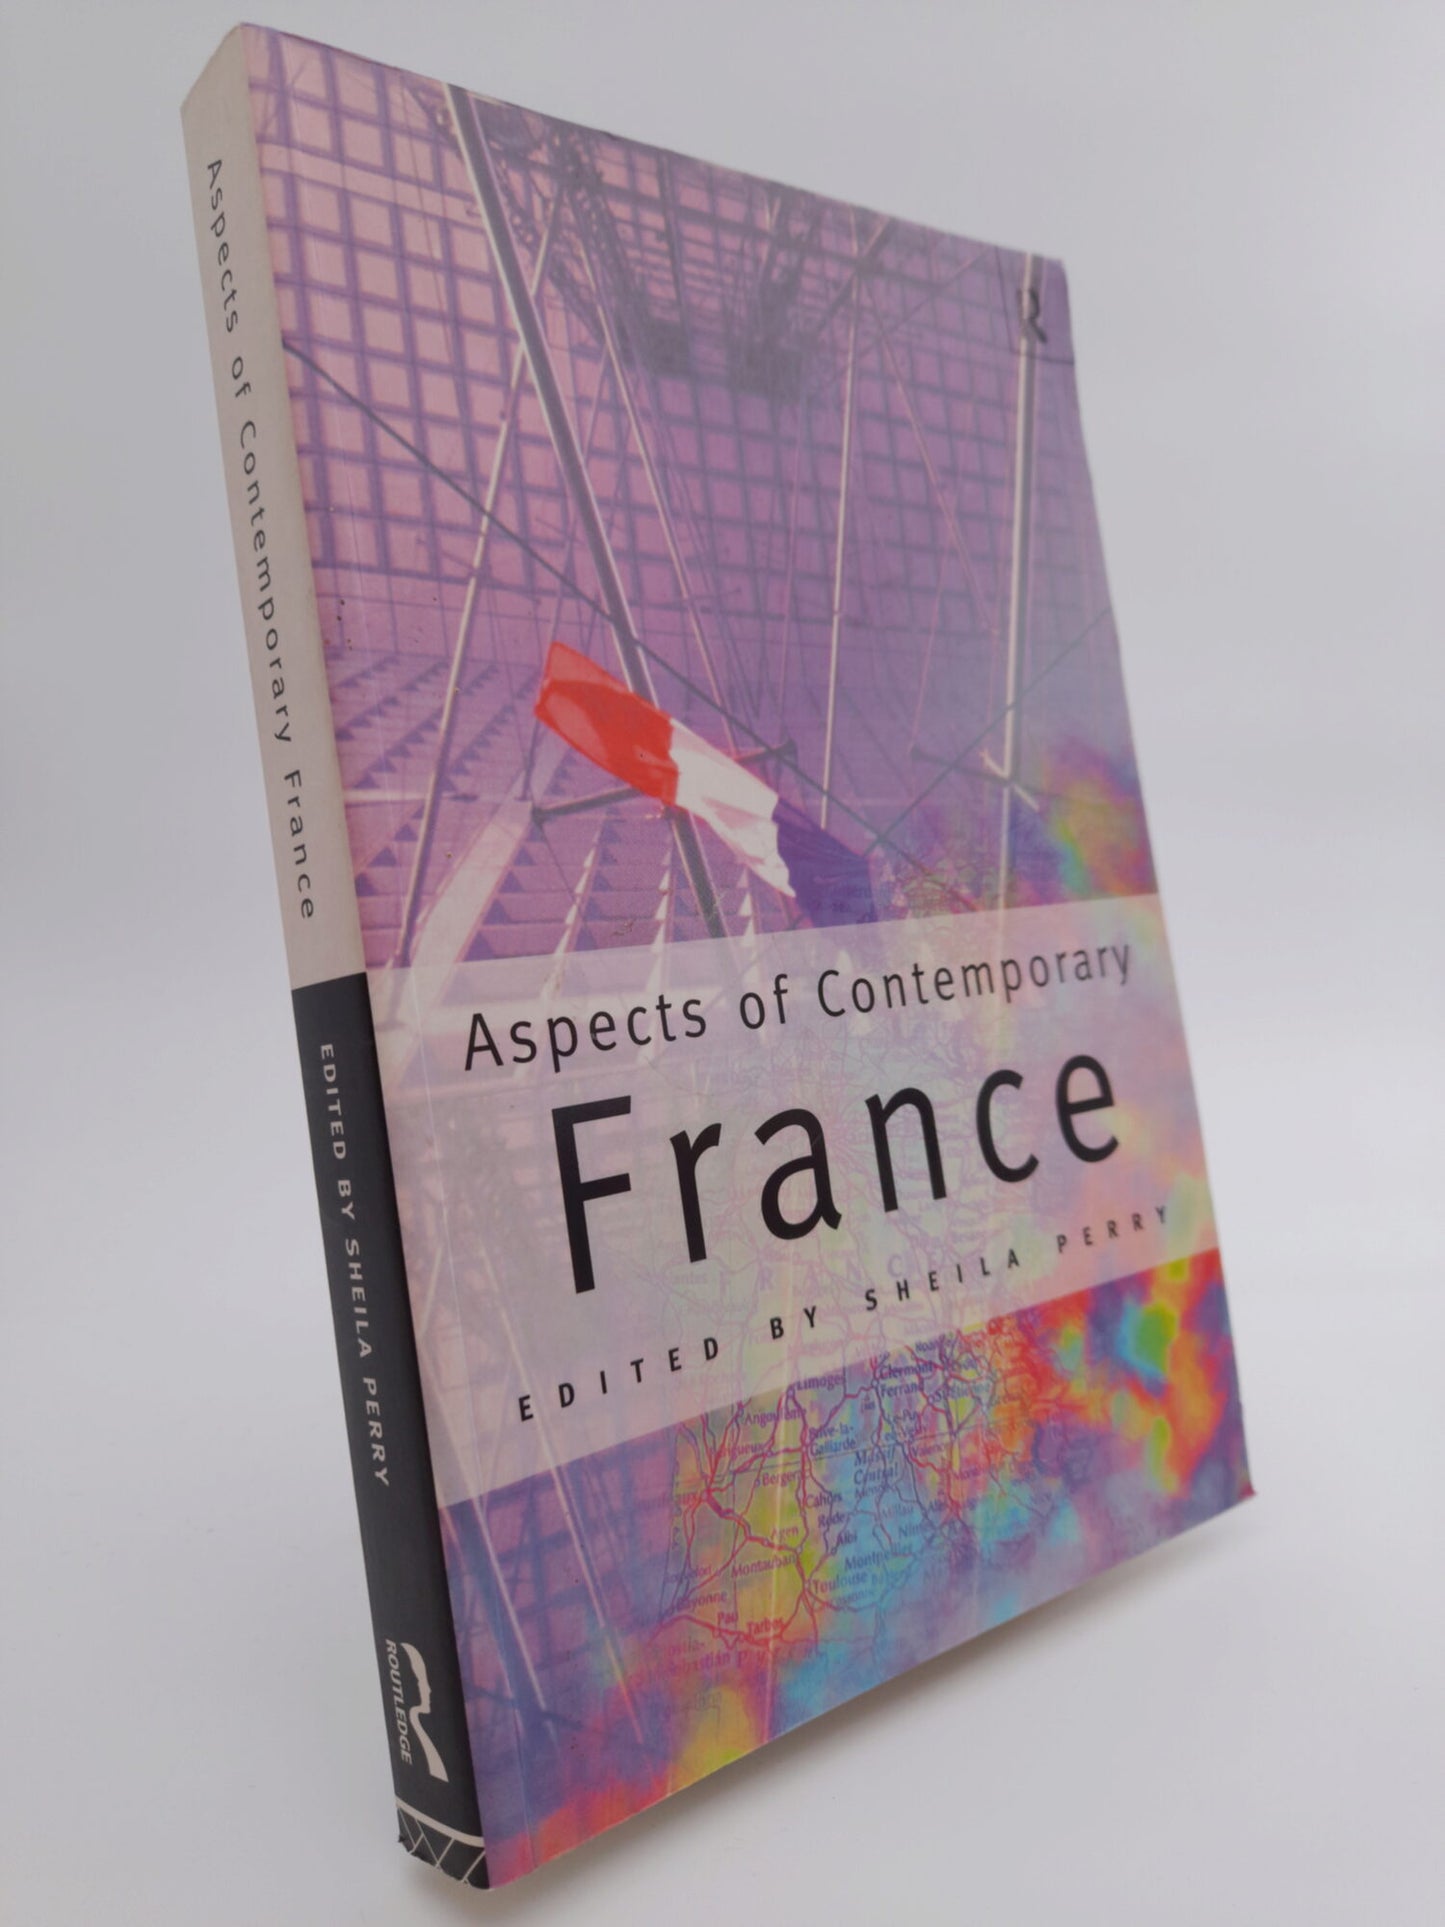 Perry, Sheila [ed.] | Aspects of contemporary France